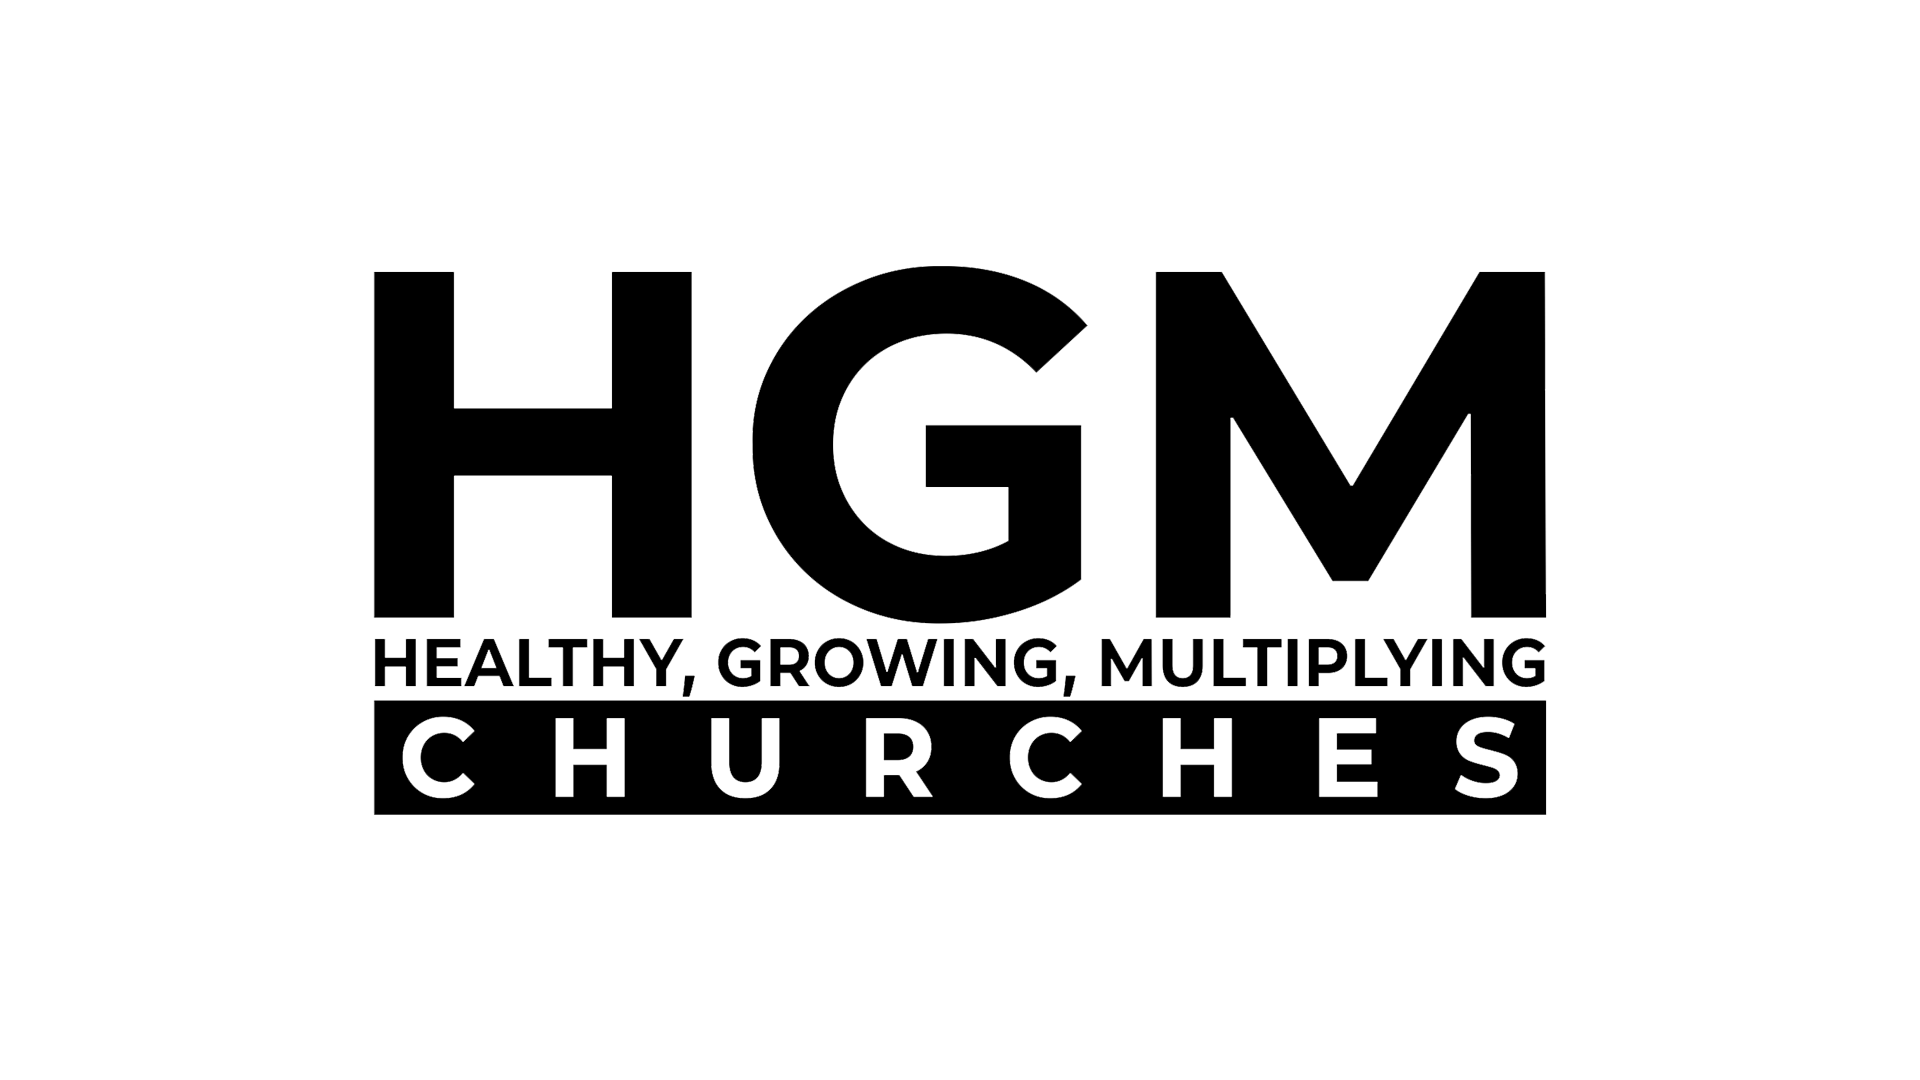 Click image to learn more about HGM.